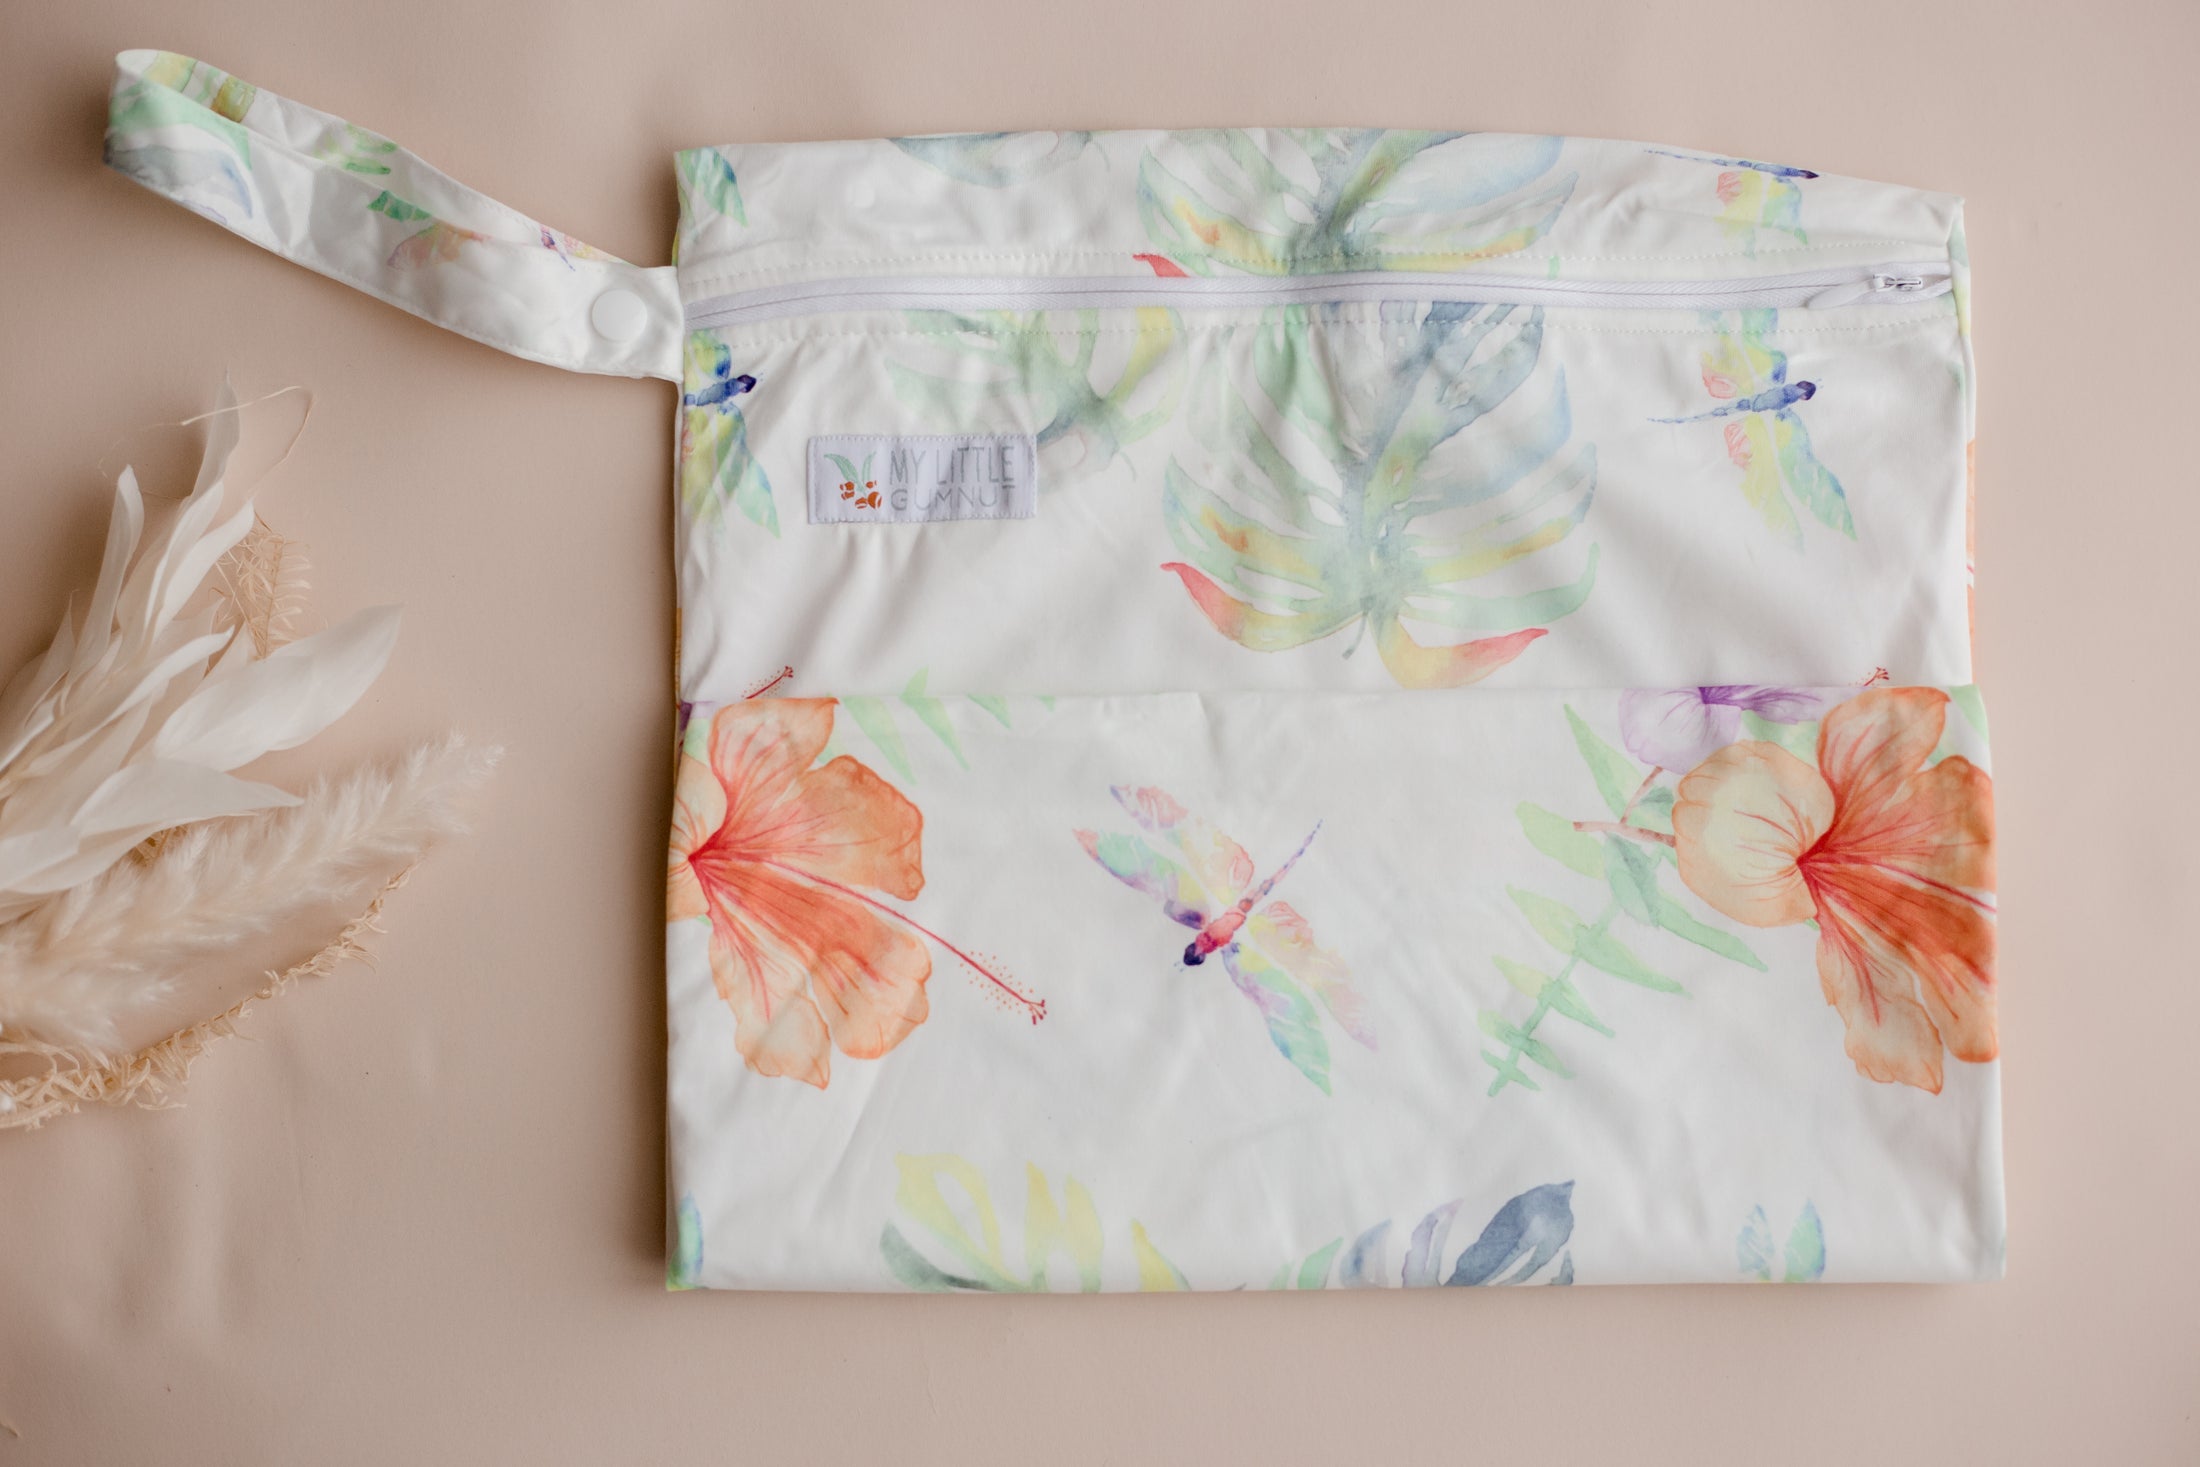 Large Wet Bag. Nappy bag. cloth nappies by my little gumnut. cloth nappies australia. reusable nappies. eco friendly nappy. 